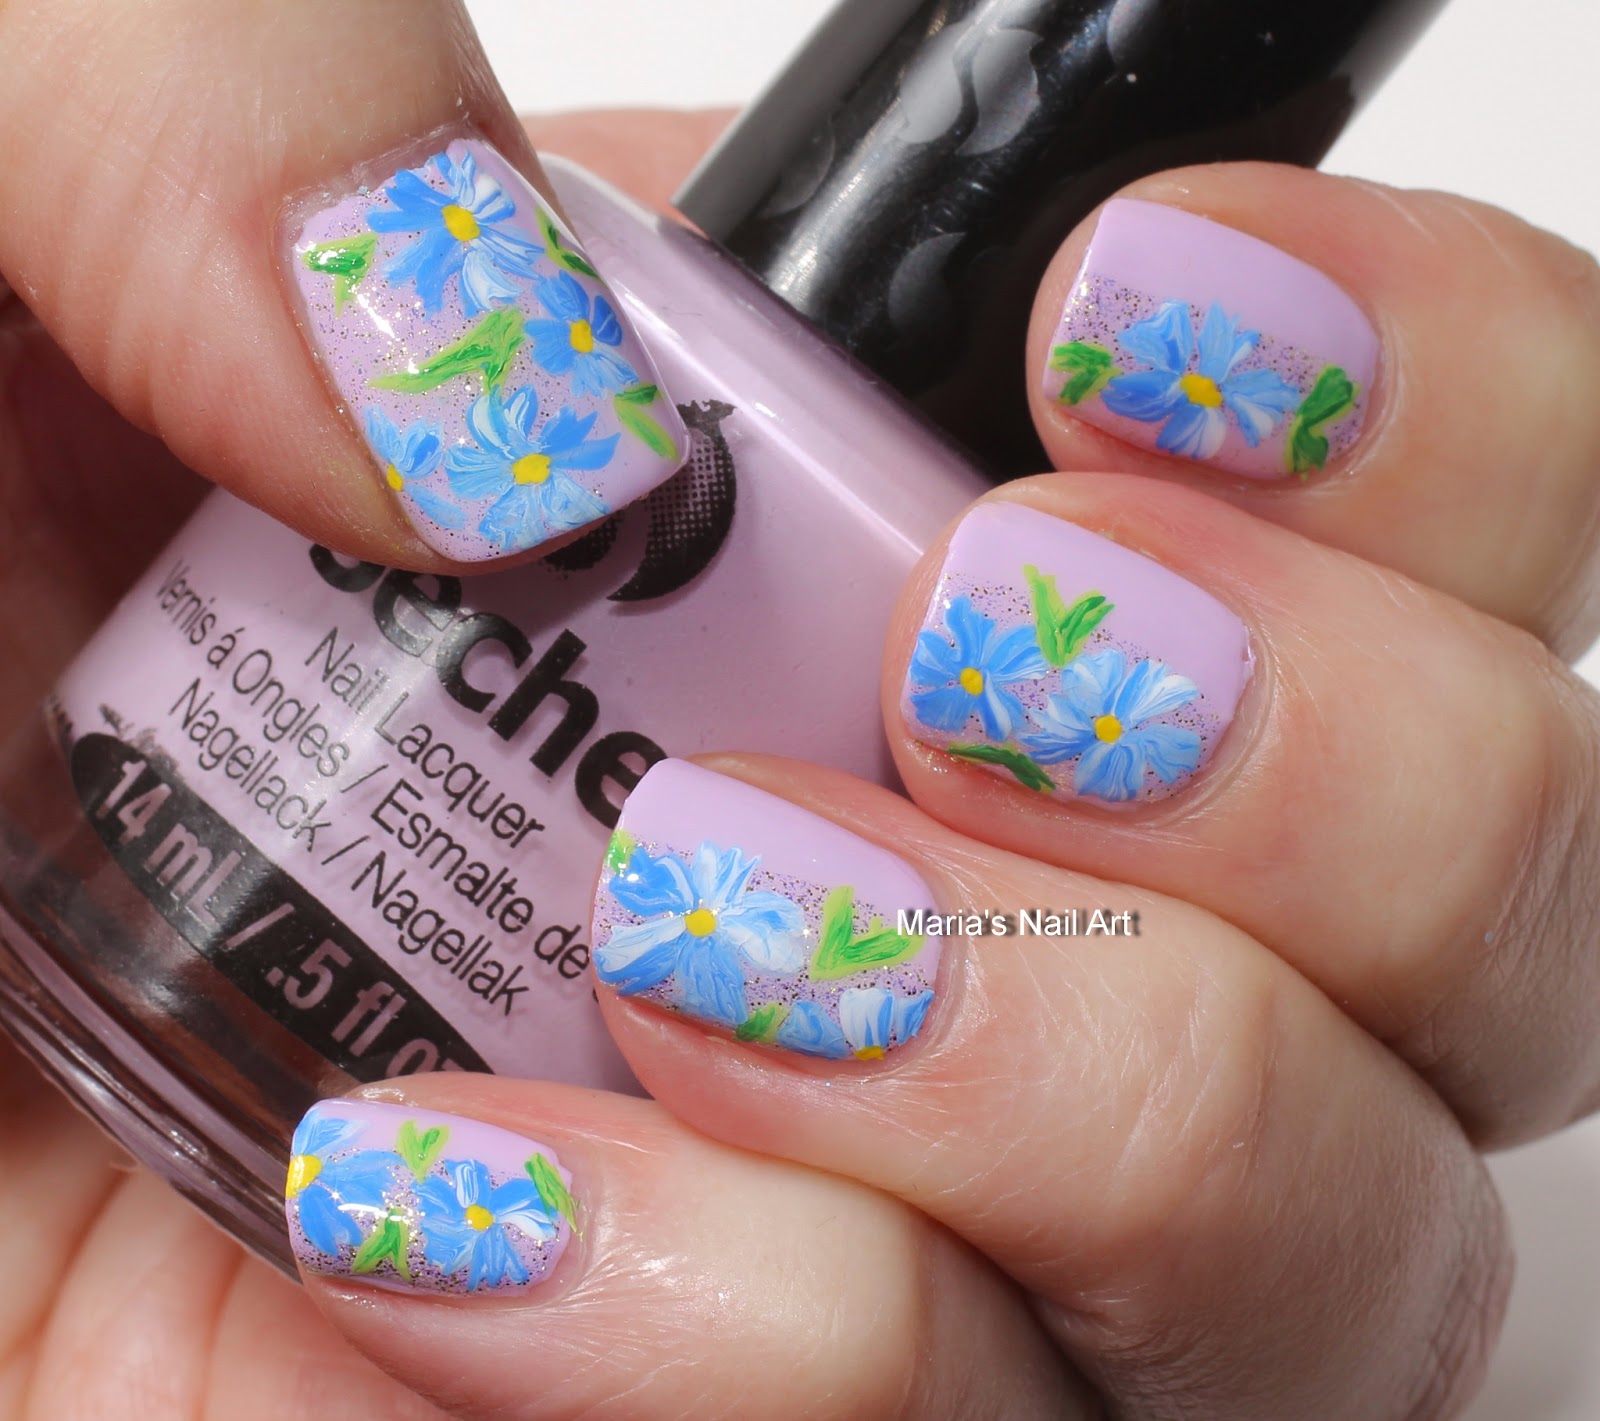 Marias Nail Art and Polish Blog: Prim and polished flowers and the ...